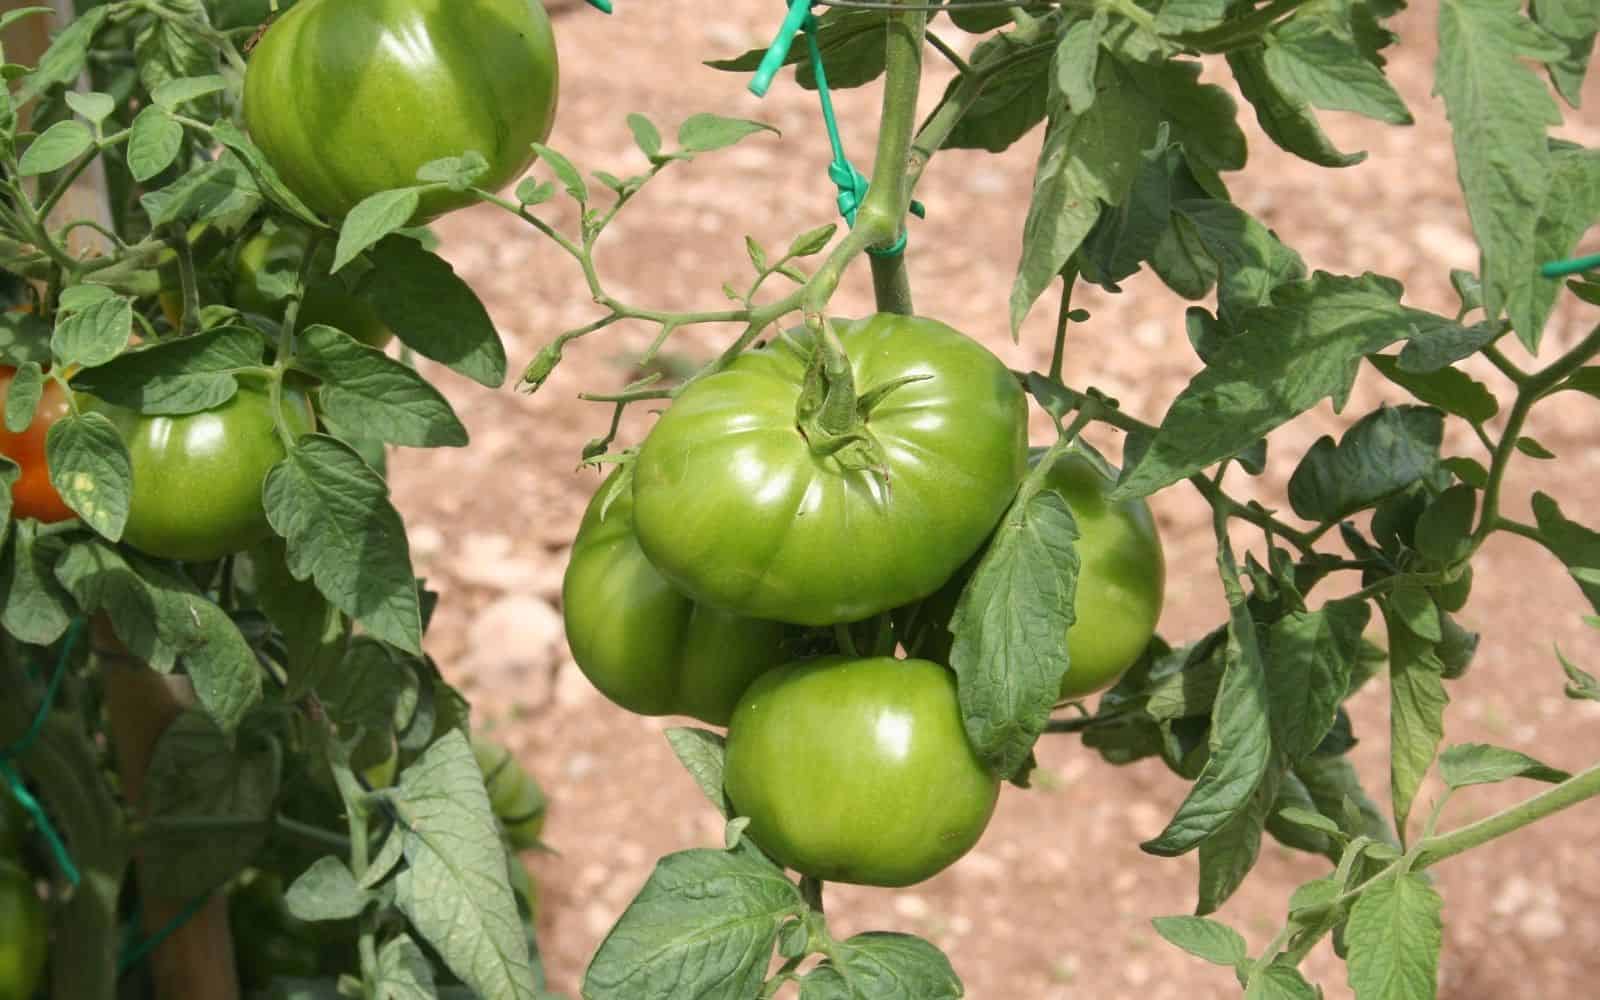 Indeterminate tomato plant with big green beefsteak tomatoes